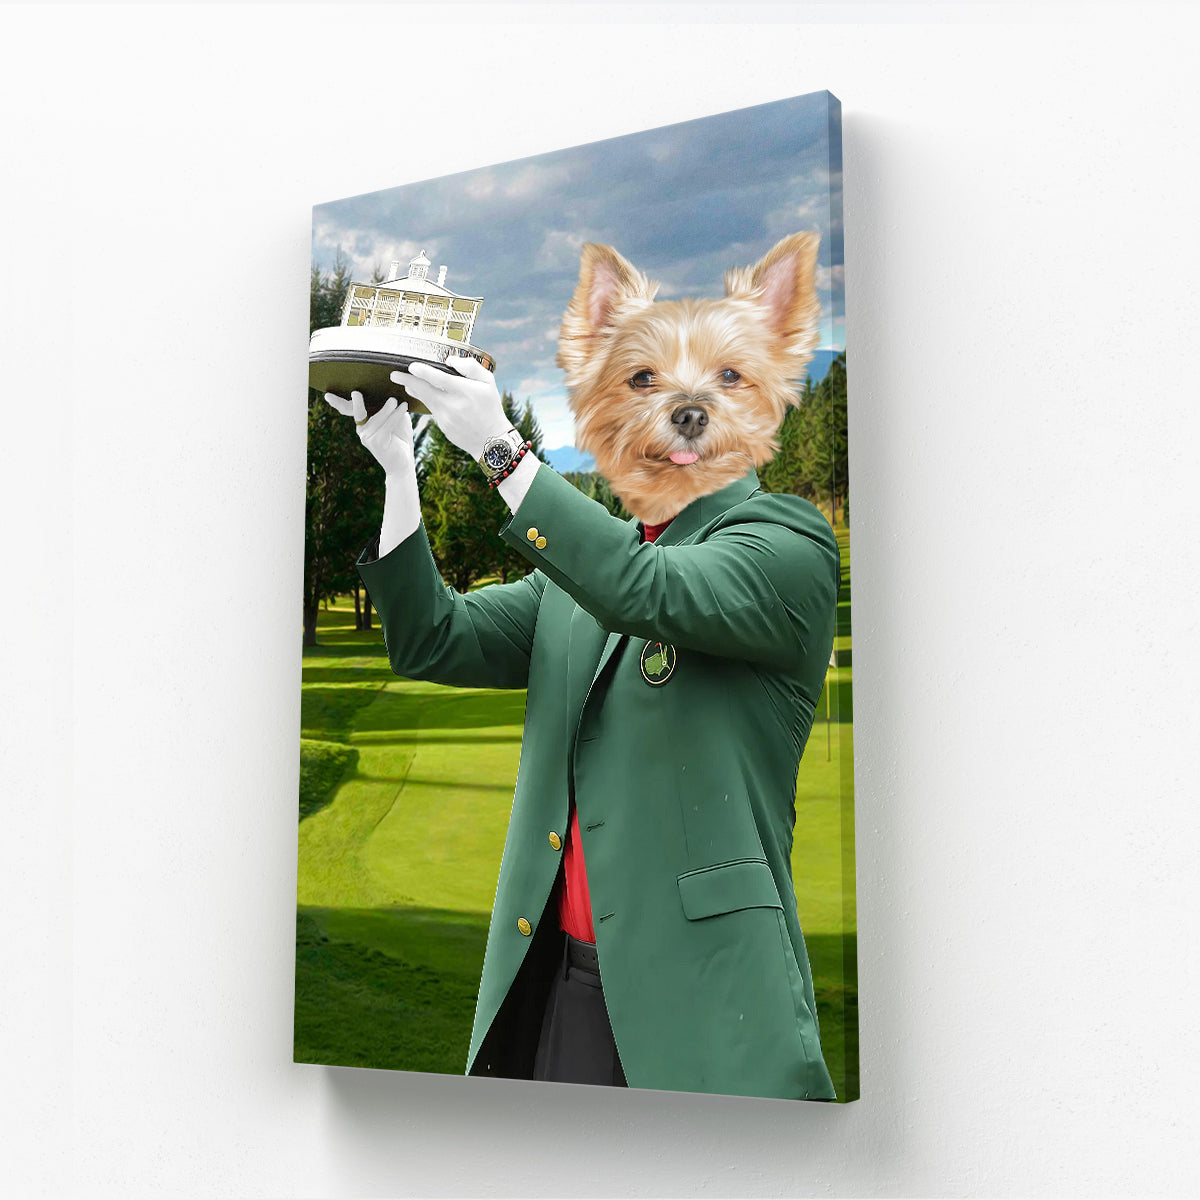    TheMasterImageCanvas, Paw & Glory, paw and glory, dog prints on canvas, pet paintings from photos, portrait of pets, dog portraits paintings, modern pet portraits, pets portraits, paw and glory,